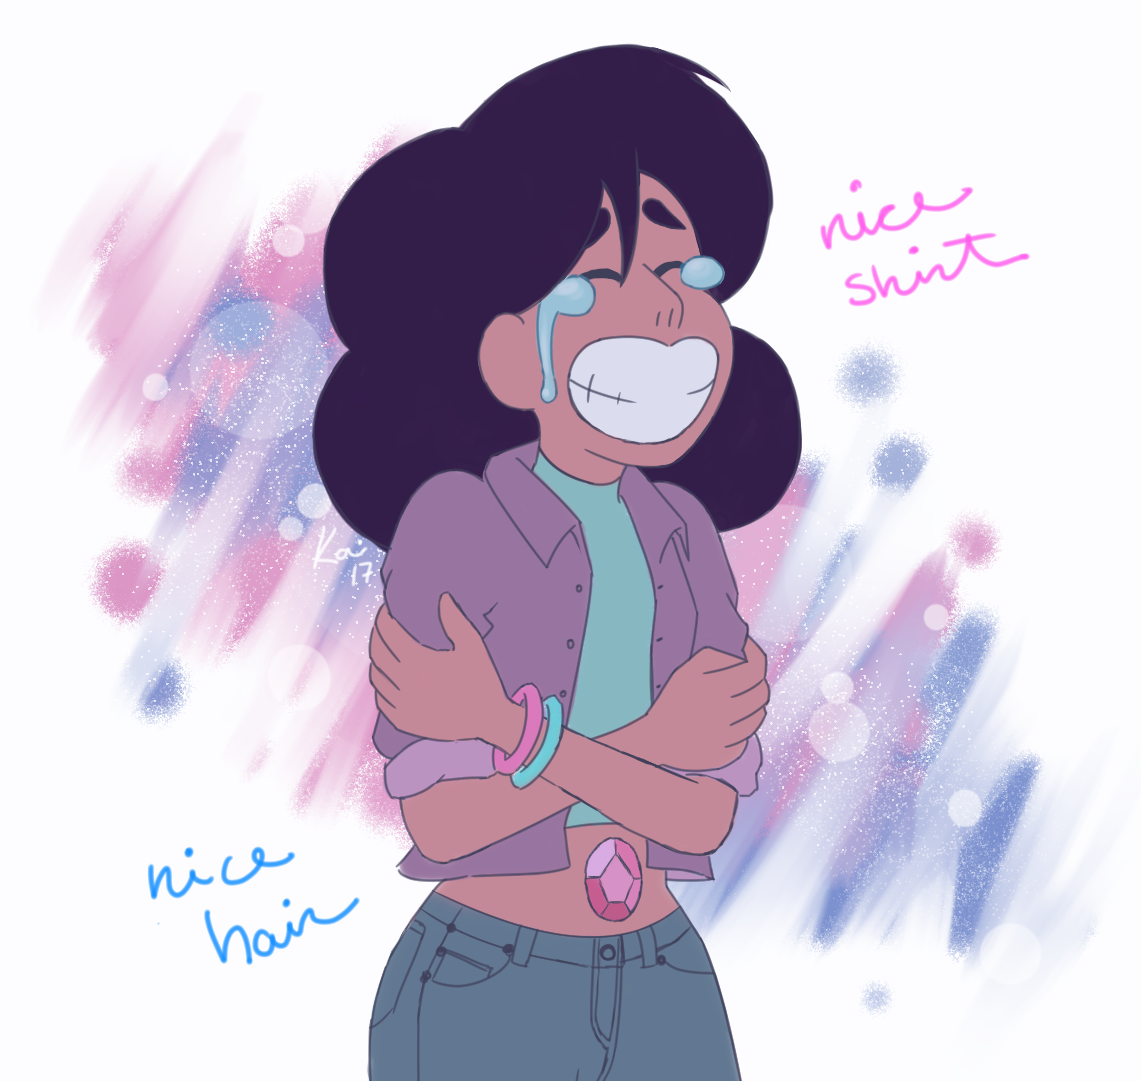 A quick Stevonnie after Kevin Party.. Those feels dude